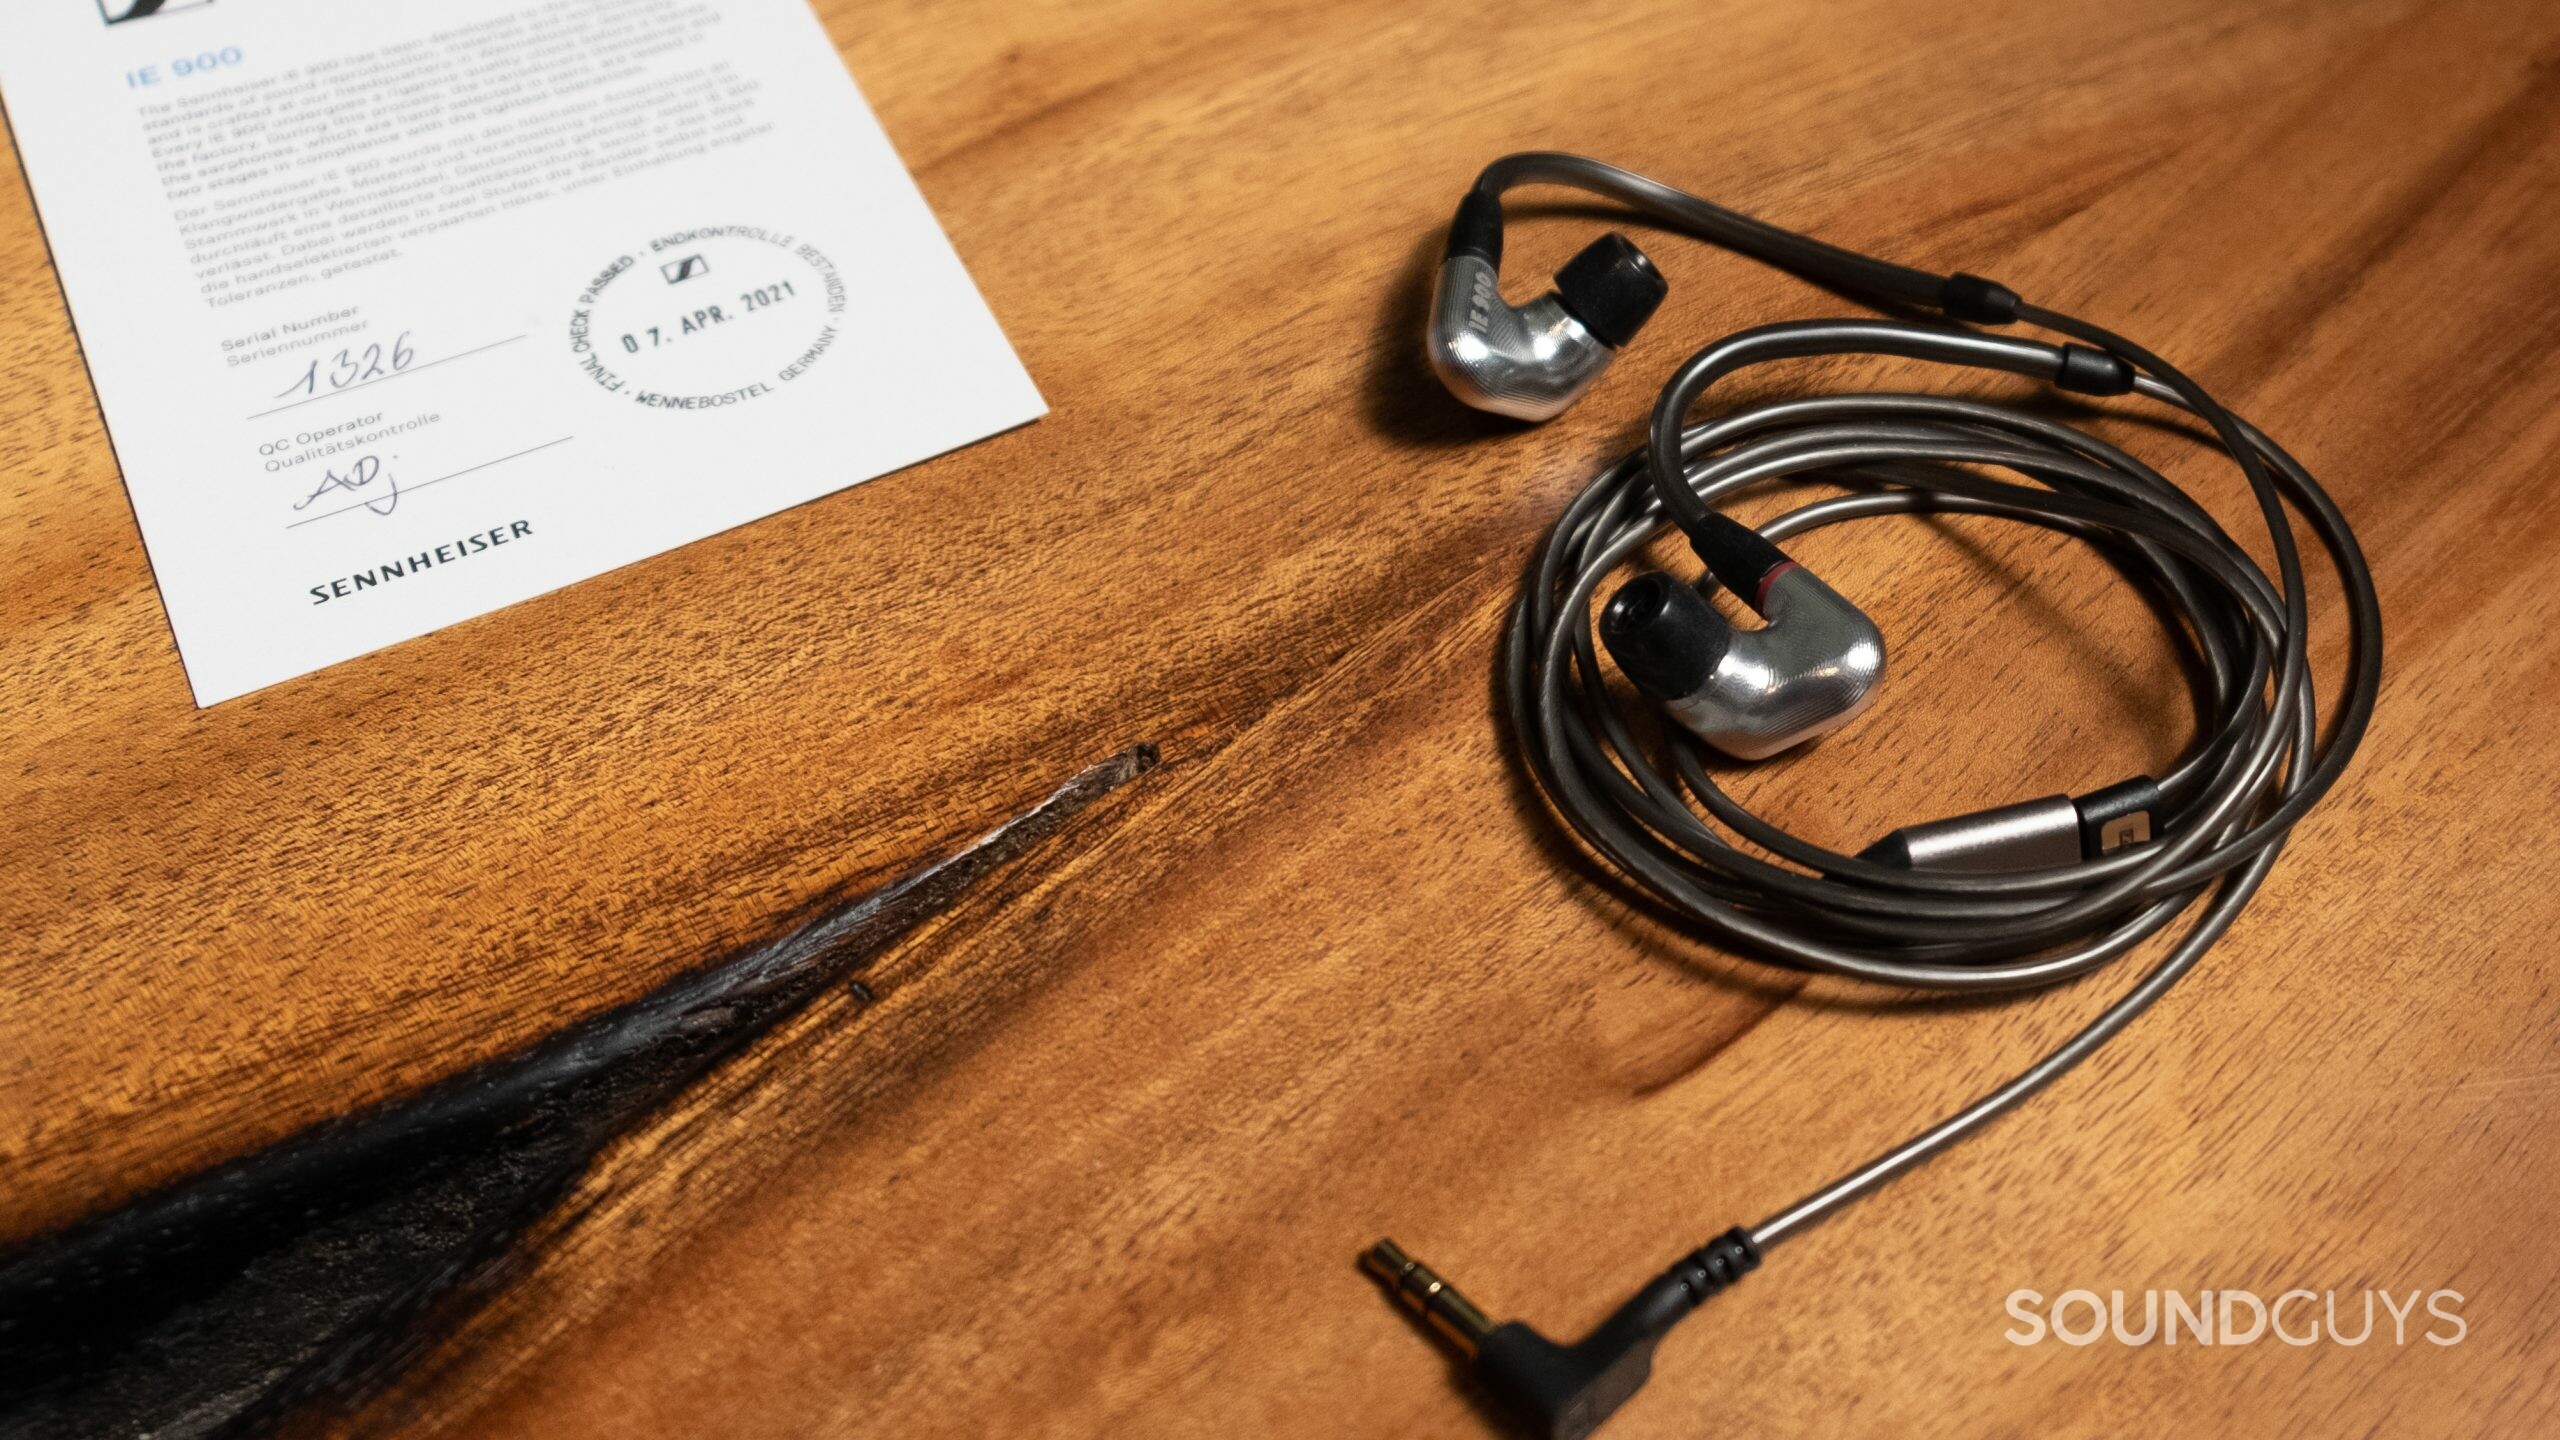 The Sennheiser IE 900 earphones coiled on a wood surface with accompanying Certificate of Authenticity.